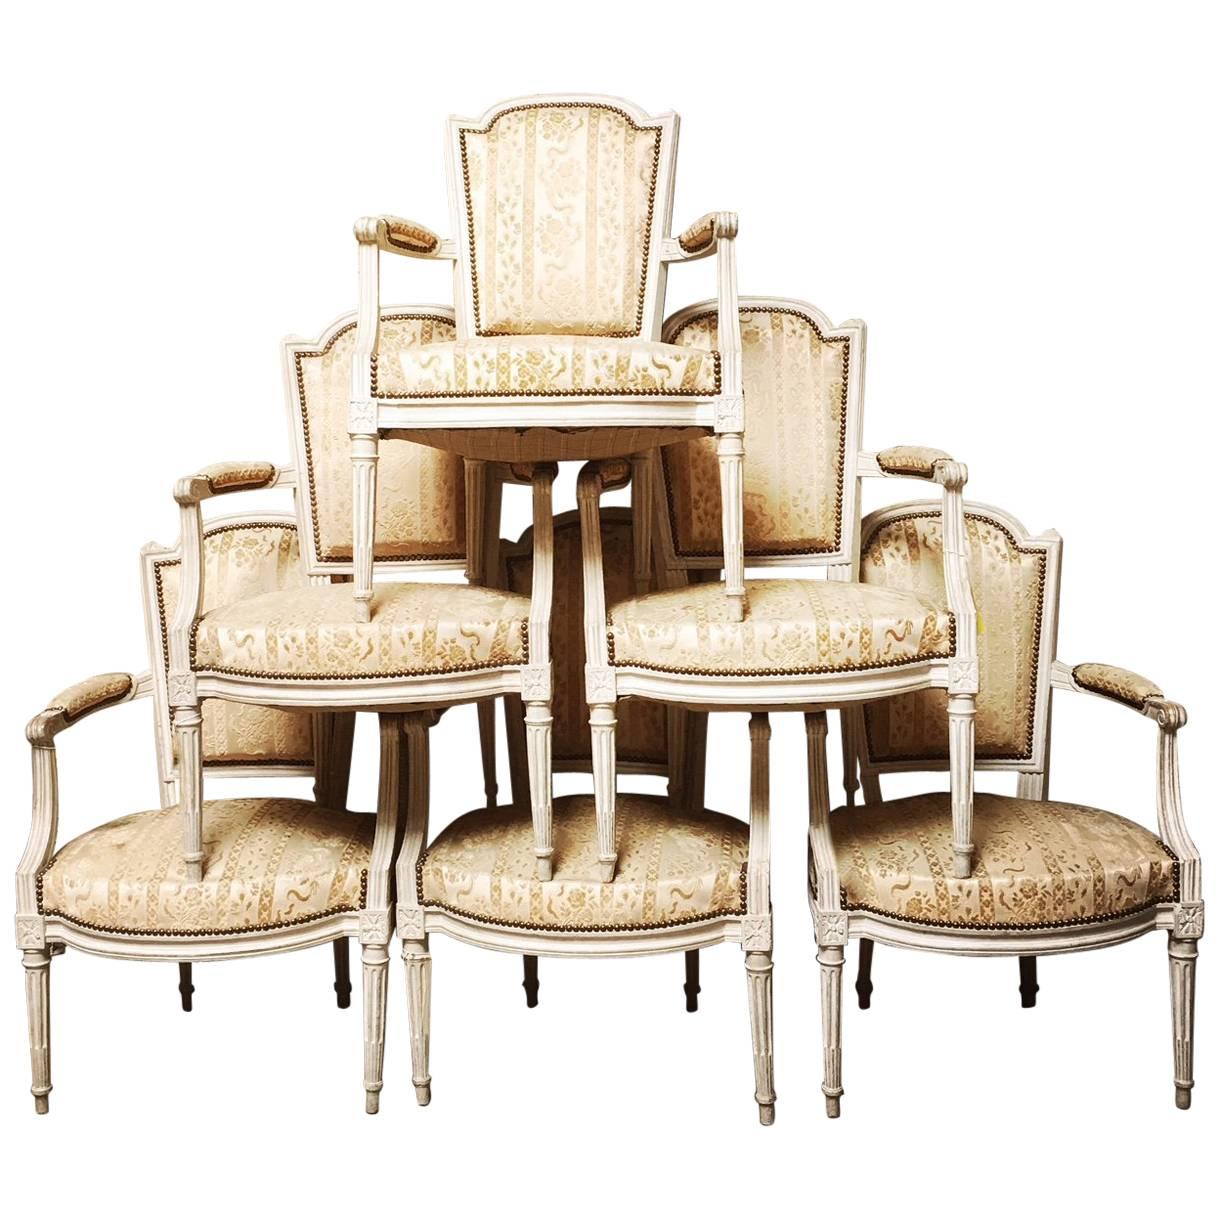 Suite of Six French Louis XVI Fauteuils with a Painted Finish, 18th Century